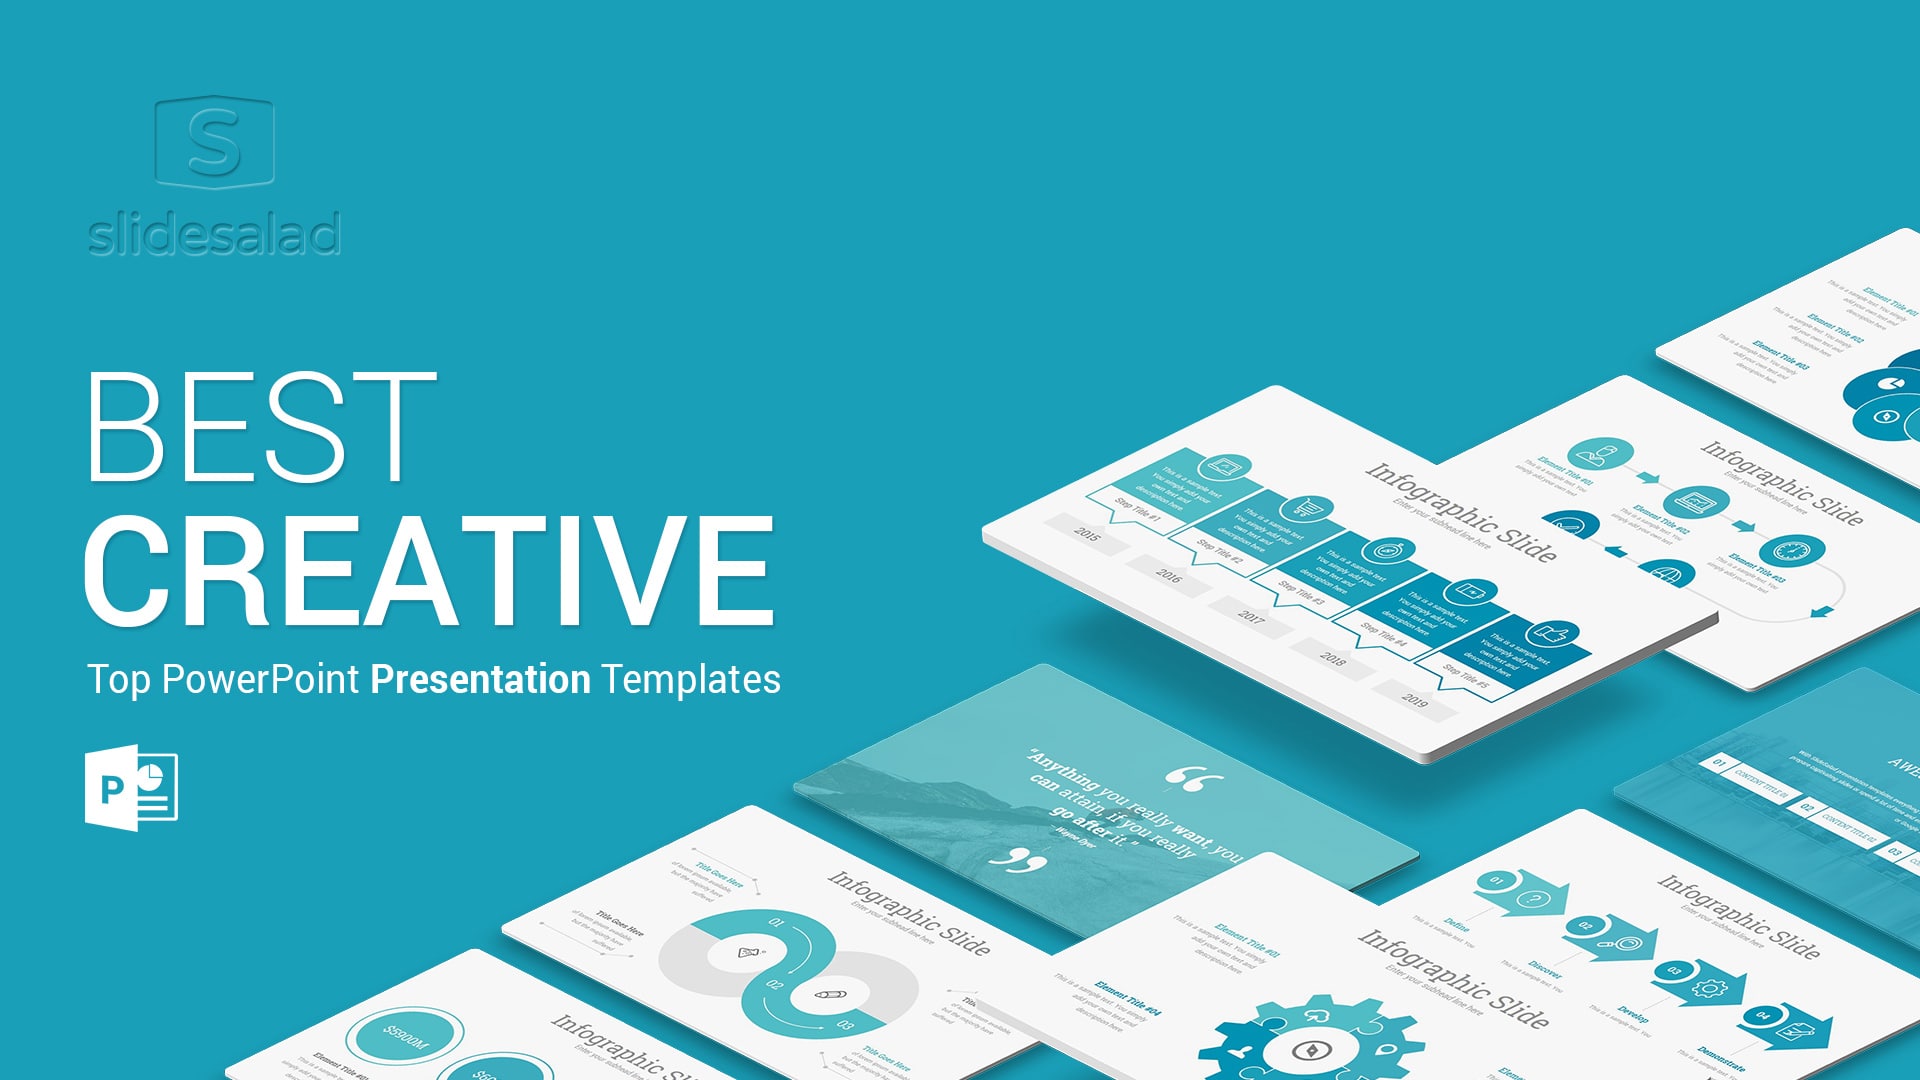 40+ Beautiful PowerPoint (PPT) Presentation Templates for 2021 SlideSalad